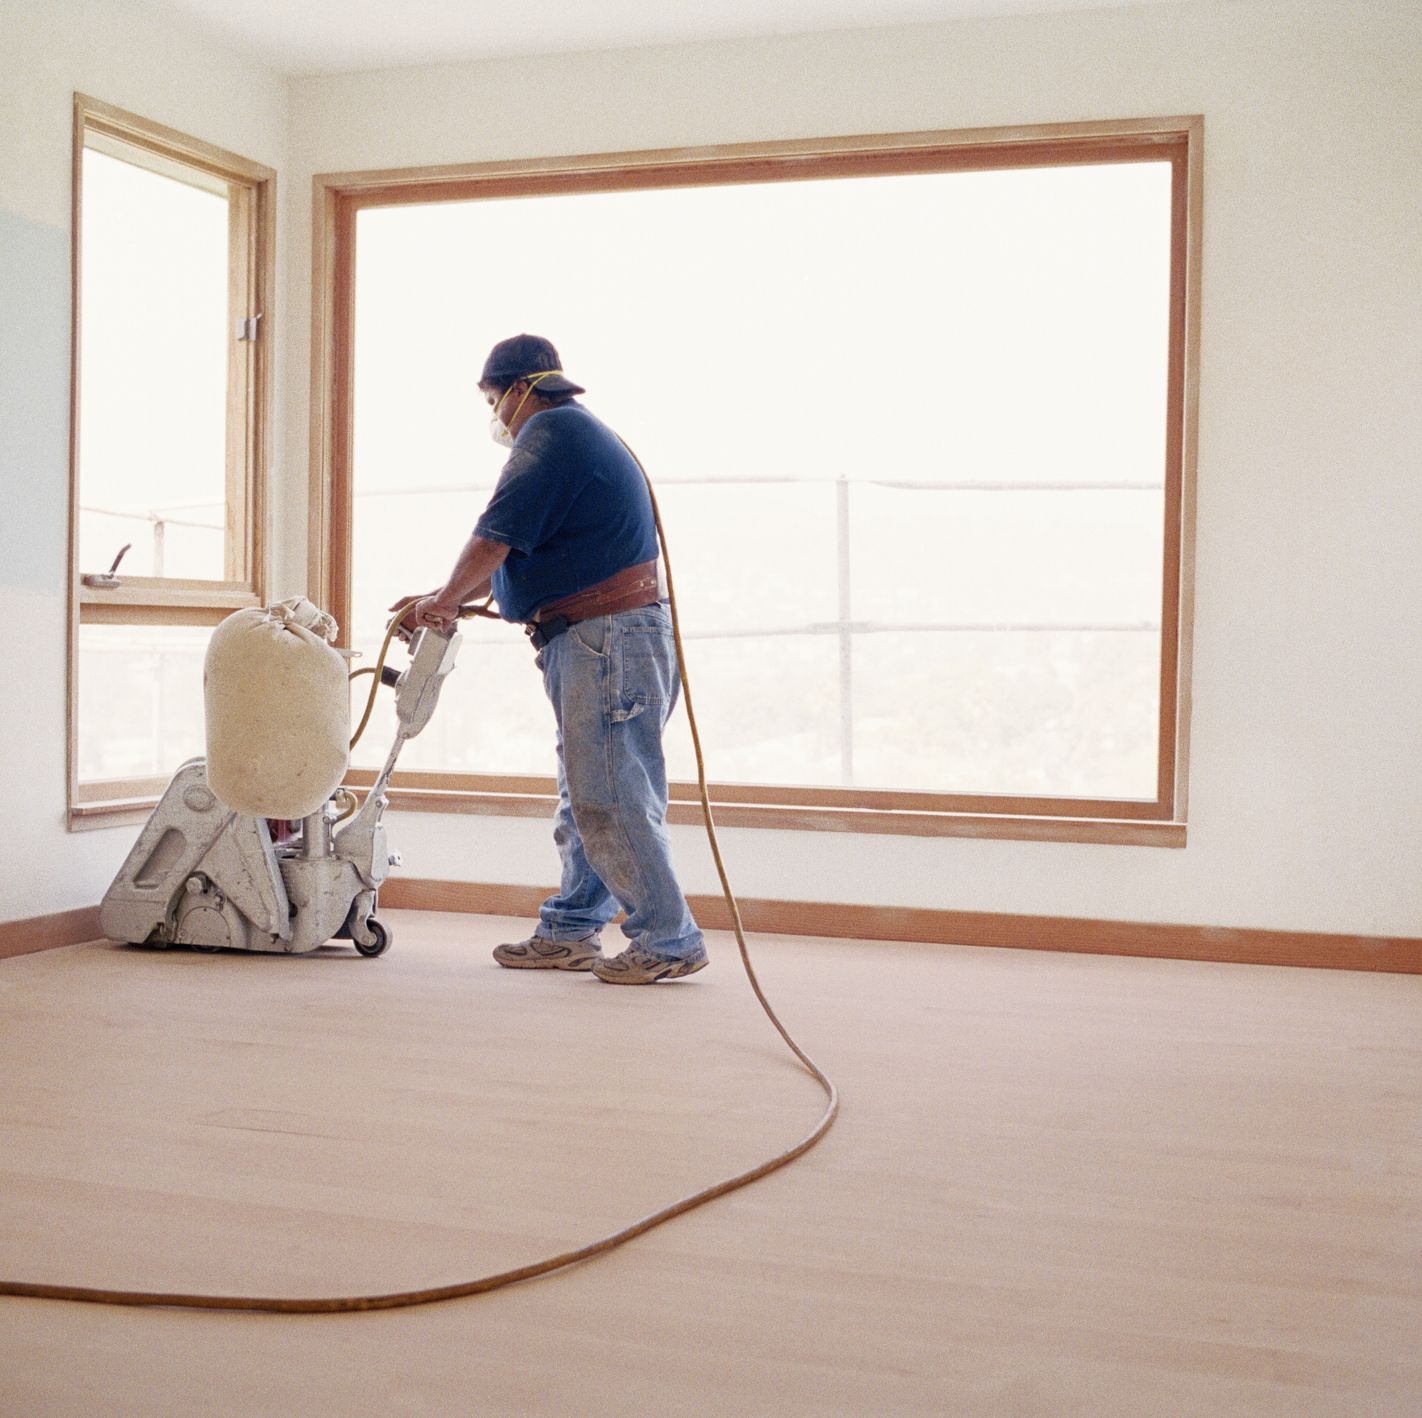 Sanding a Wood Floor This Summer? Do It Right With Our Floor Sanding Tips From A Pro